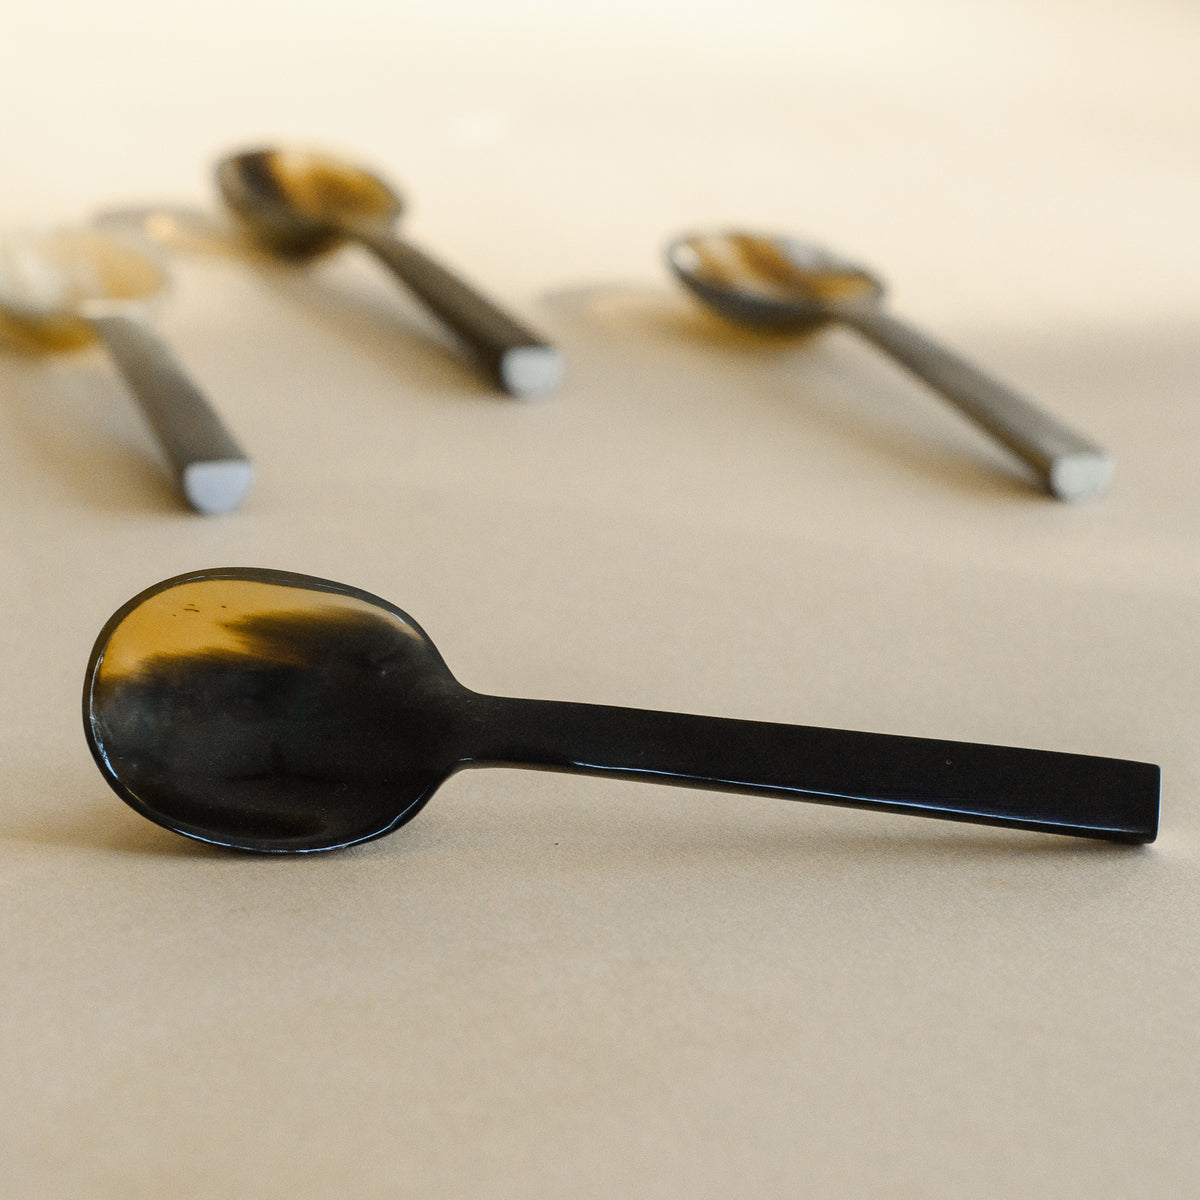 A closeup of a small horned marble coffee spoon, with three additional spoons in the background.